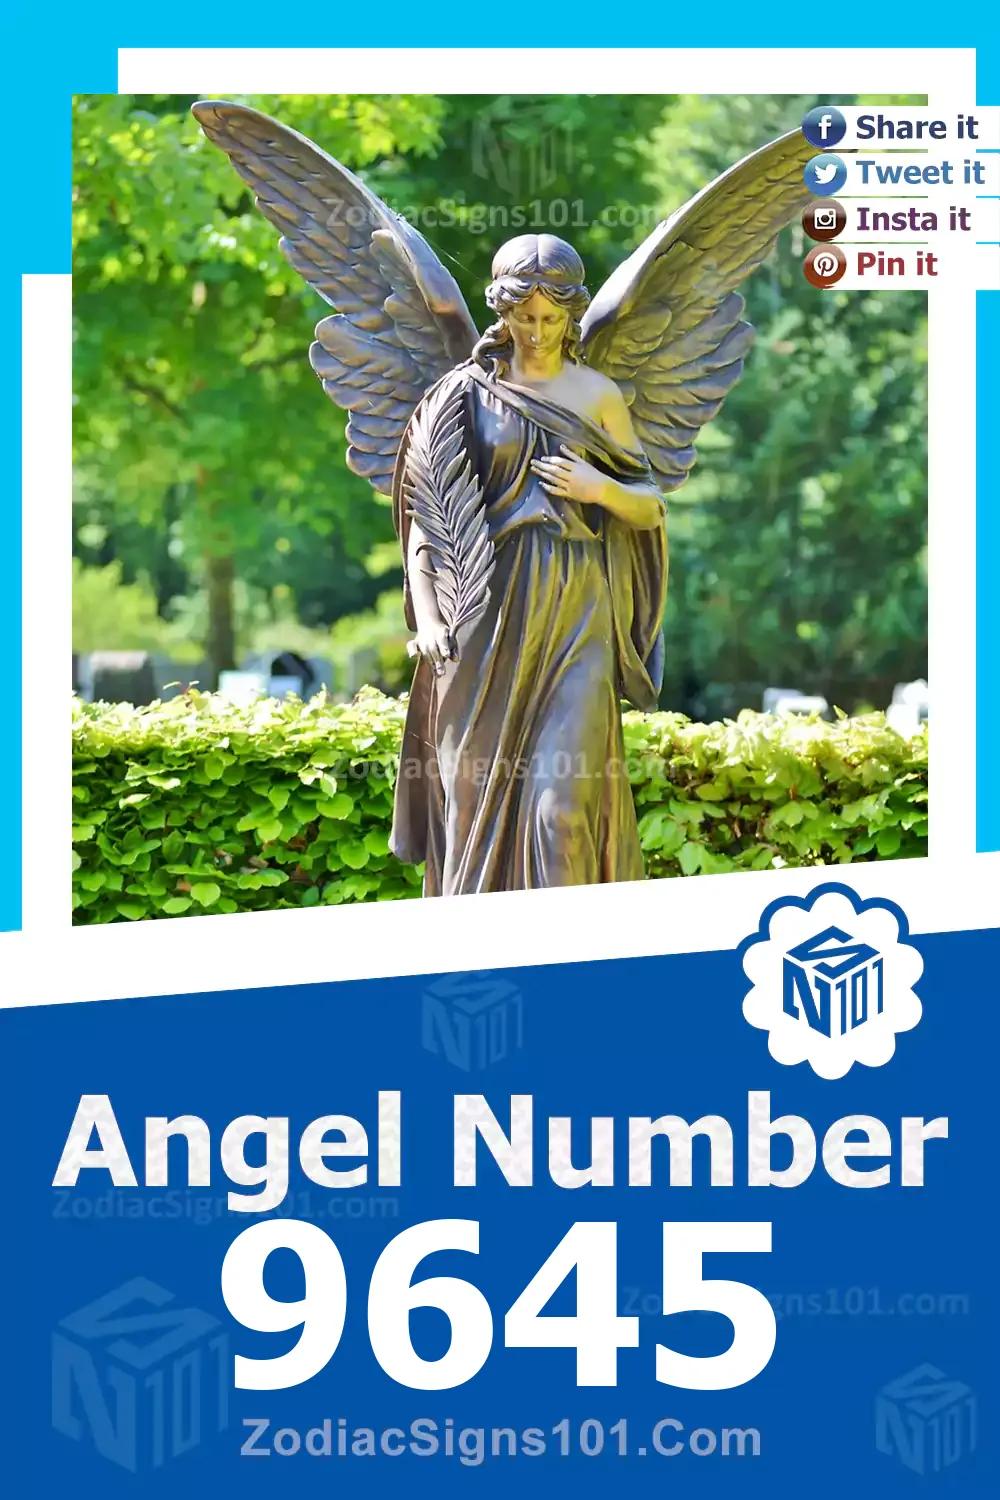 9645 Angel Number Meaning